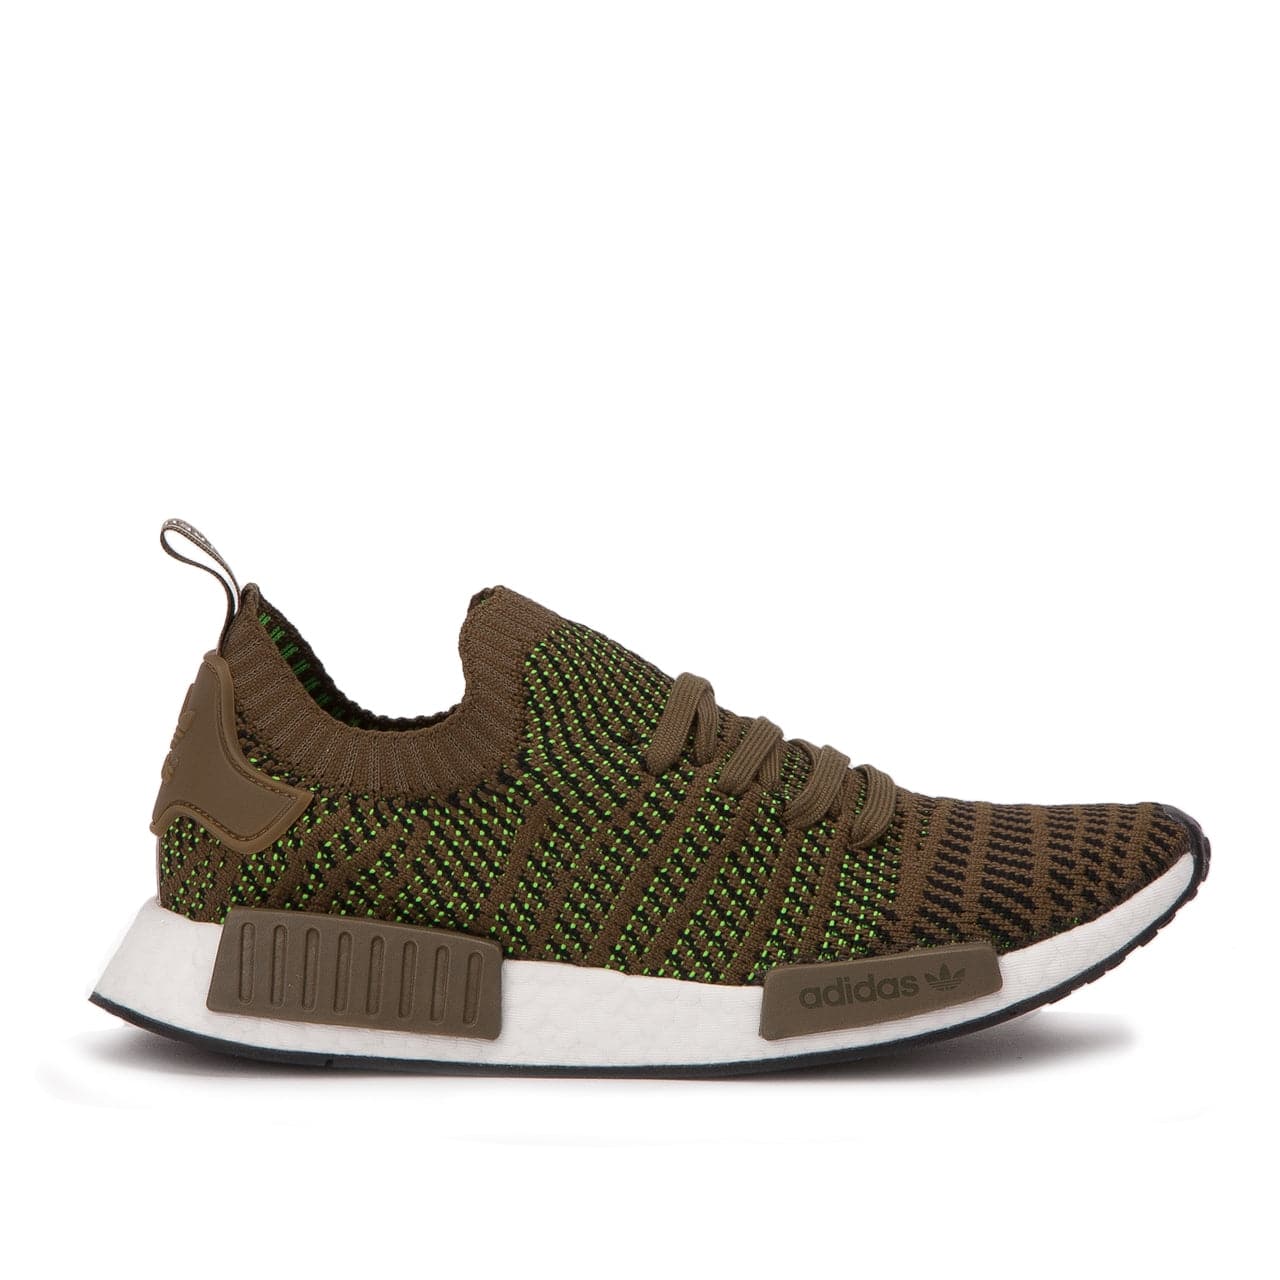 NMD_R1 PK 'Stealth Pack' (Olive / Black) CQ2389 Store